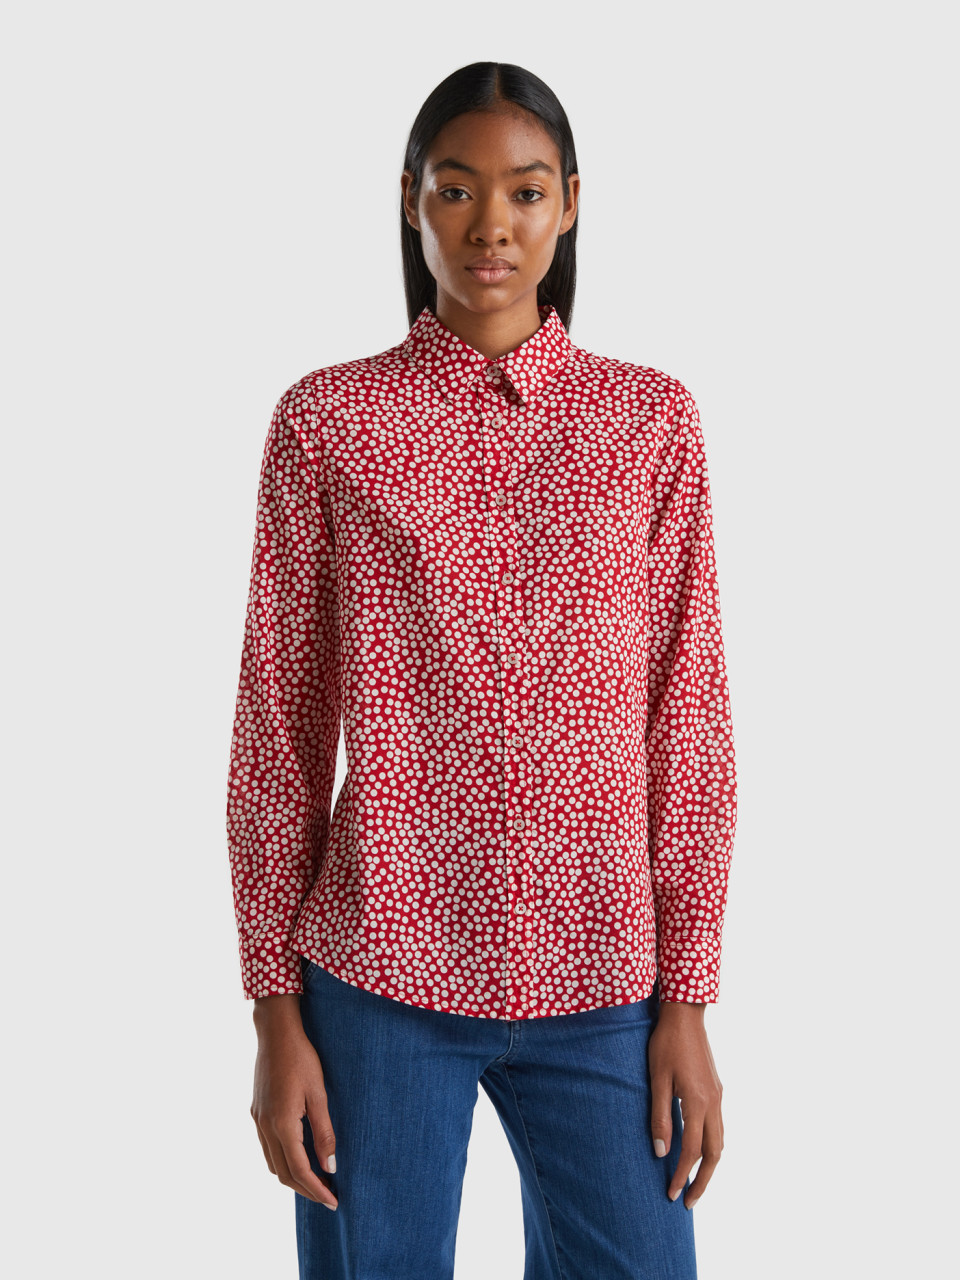 Benetton, Red Shirt With White Polka Dots, Red, Women